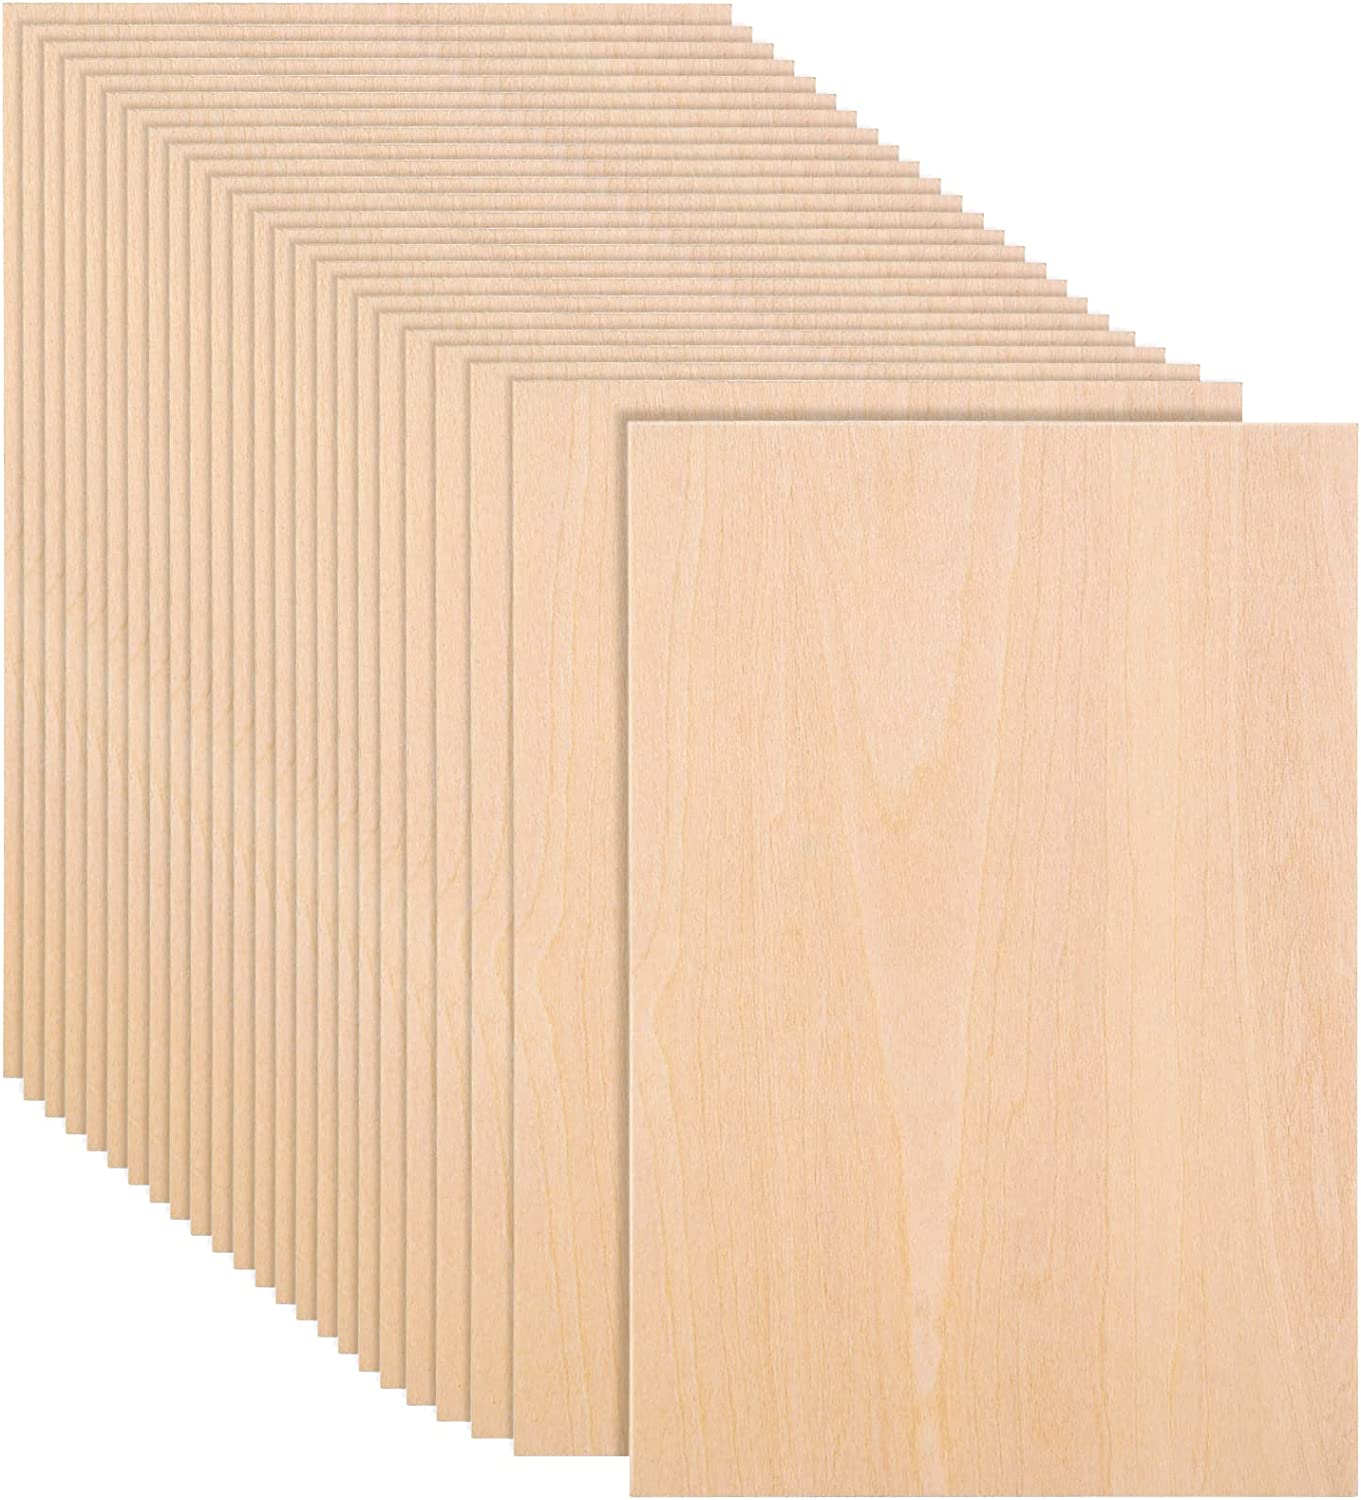 24 Pcs 1/8 Inch Balsa Wood Sheets for Crafts 3 mm Thick Craft Wood  Unfinished